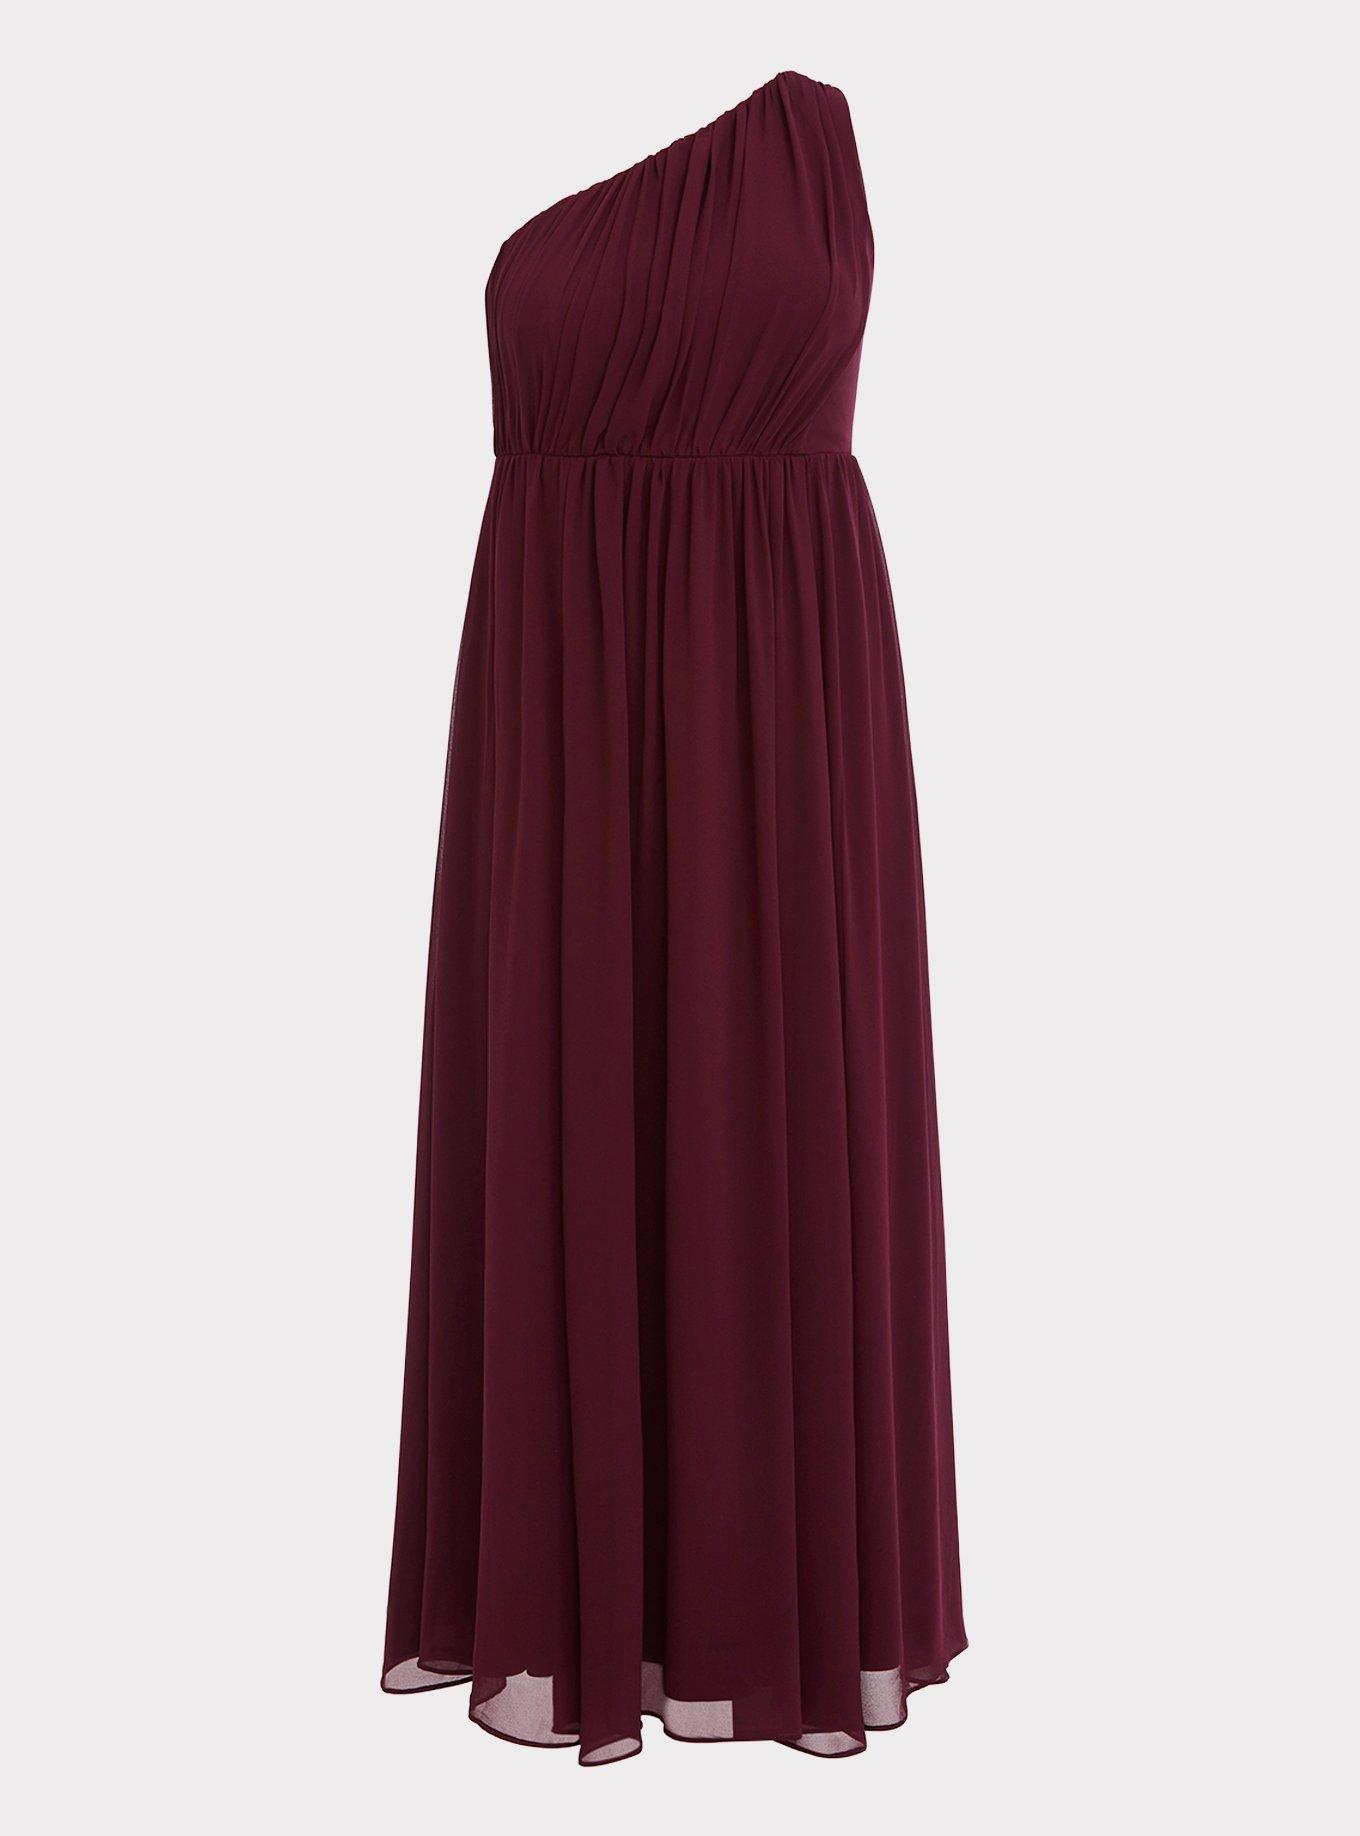 Plus Size - Special Occasion Burgundy One Shoulder Chiffon Gown - Torrid